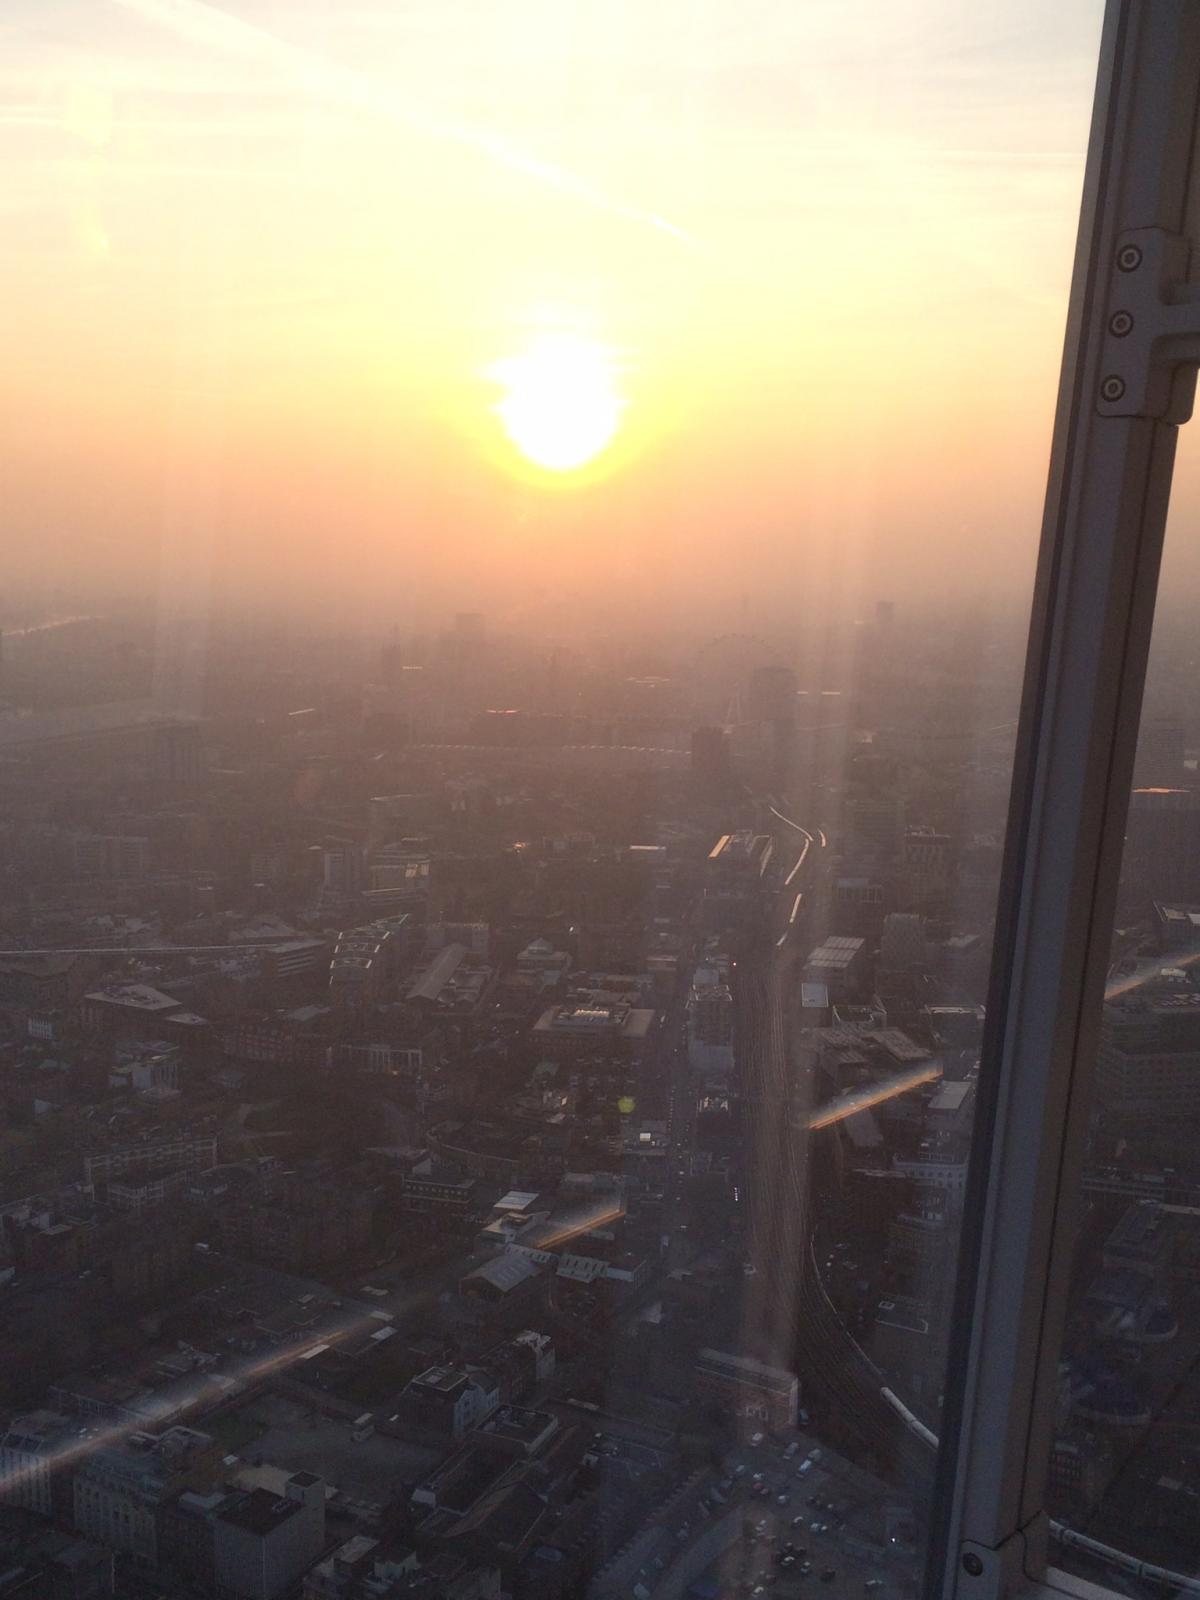 Peaceful: view from the Shard